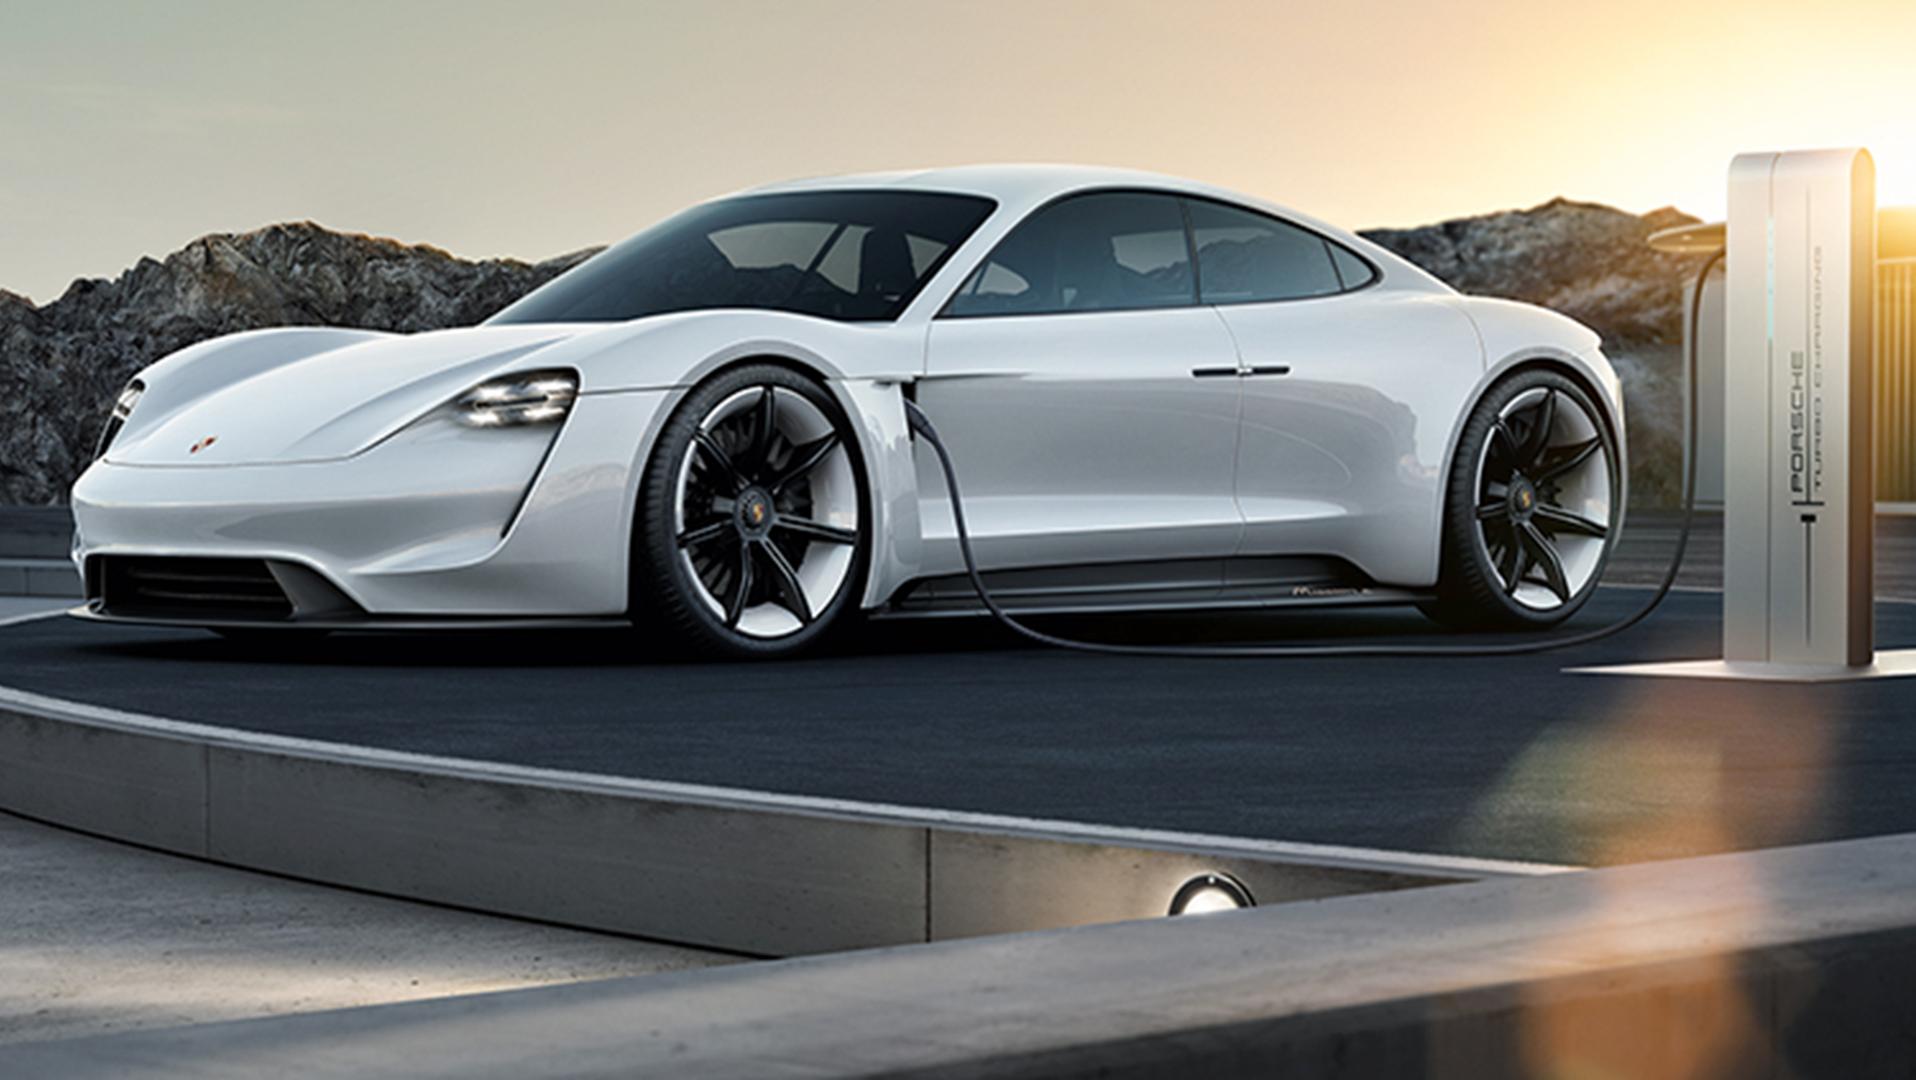 Porsche’s reservations for the Taycan are a sign that Tesla is accomplishing its mission